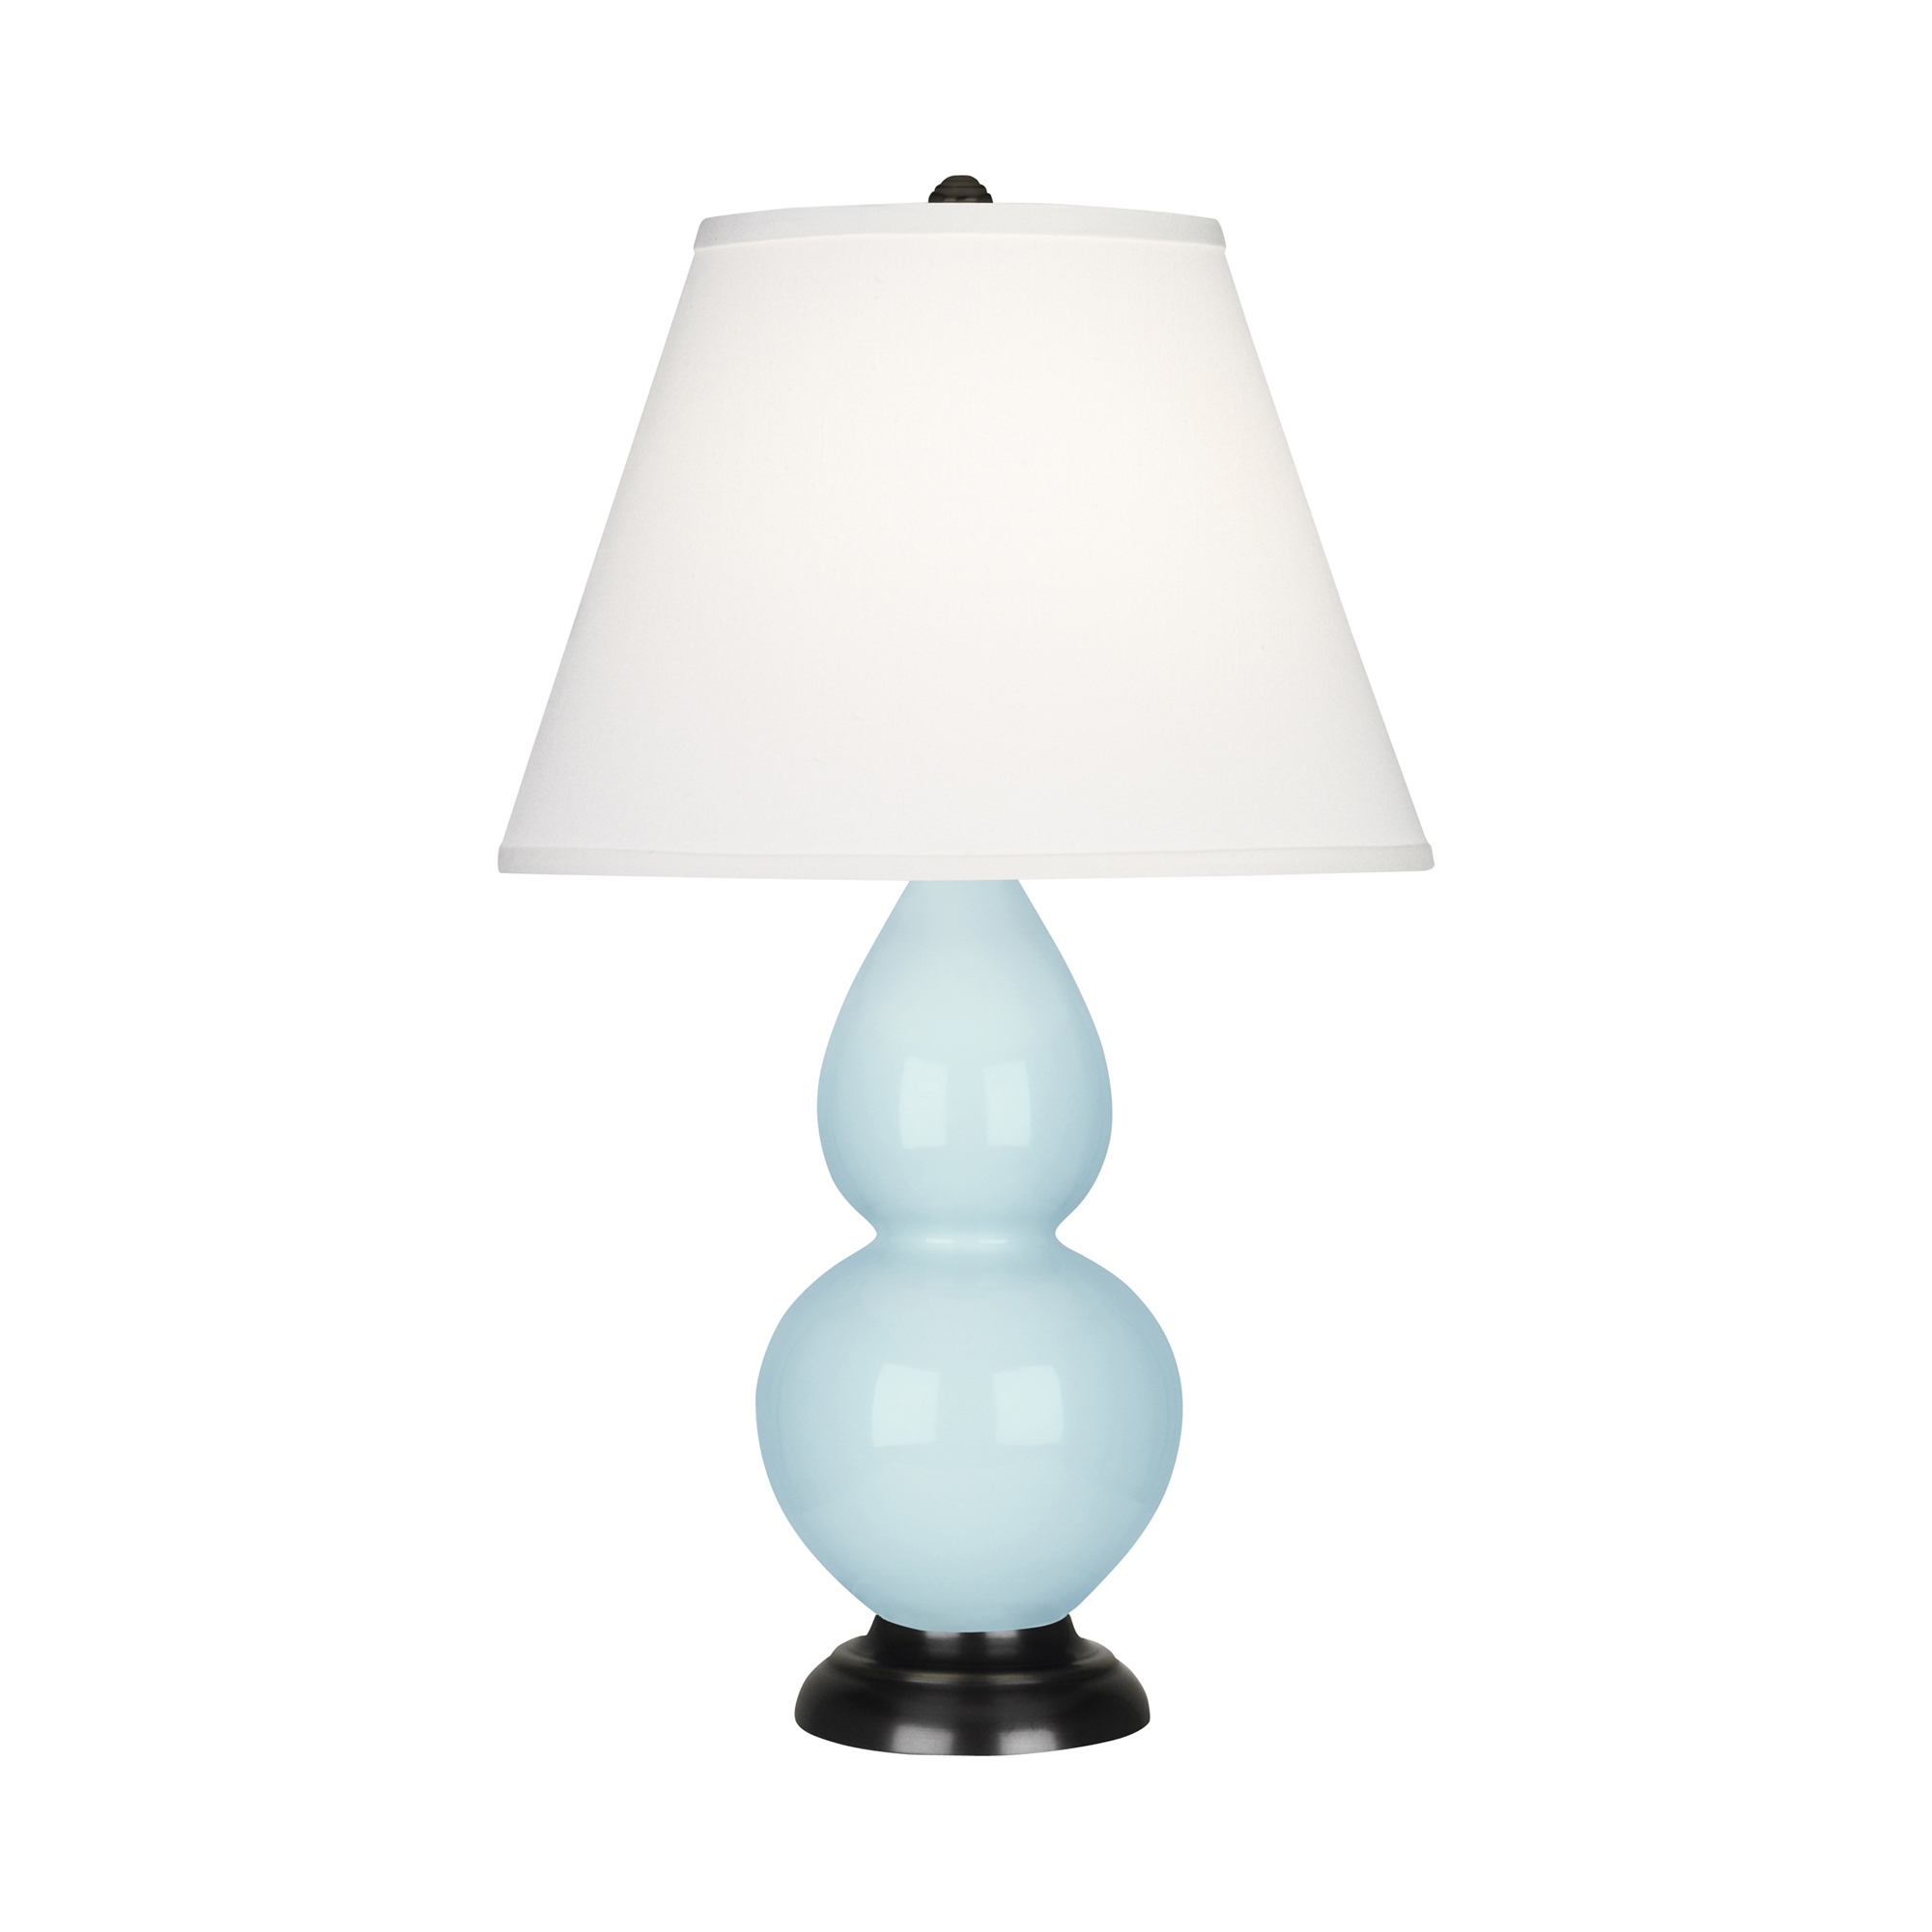 Small Double Gourd Accent Lamp Style #1656X